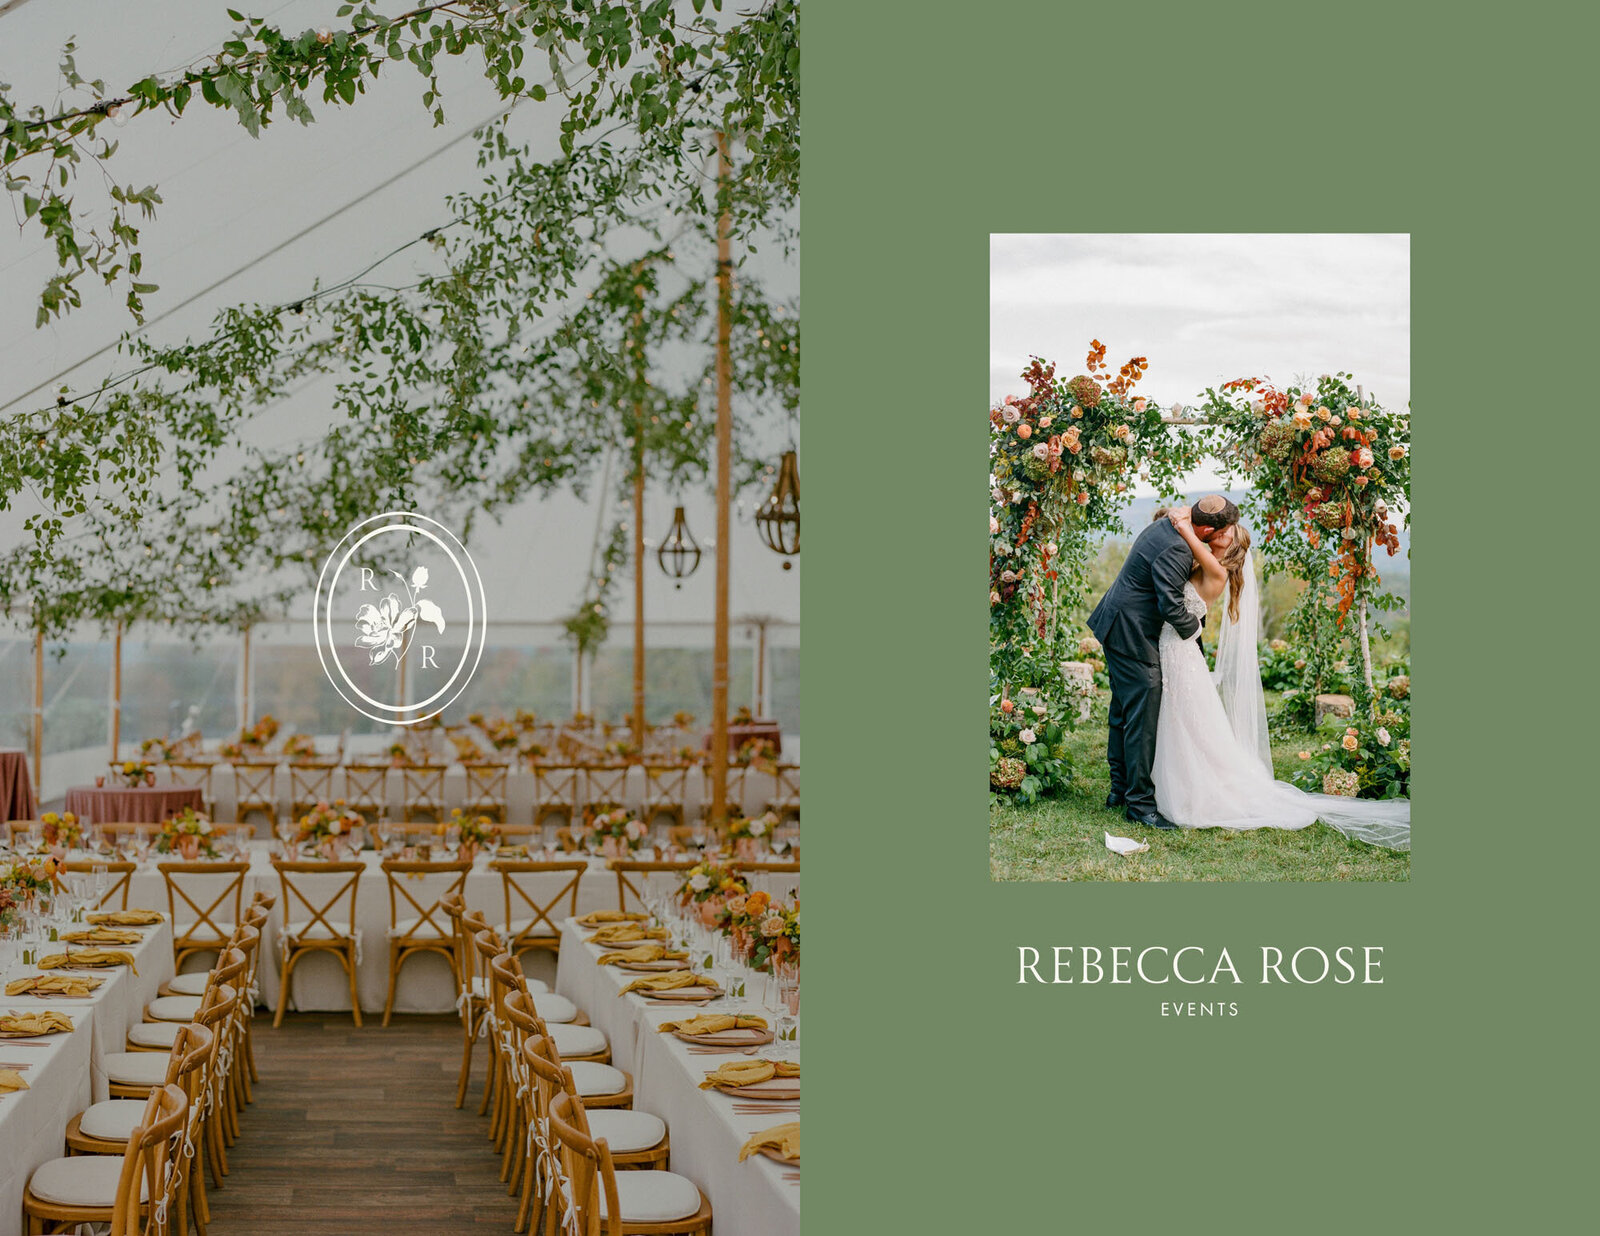 visual-identity-graphics-by letter-south-for-rebecca-rose-events-luxury-wedding-plannerRRE-Concept